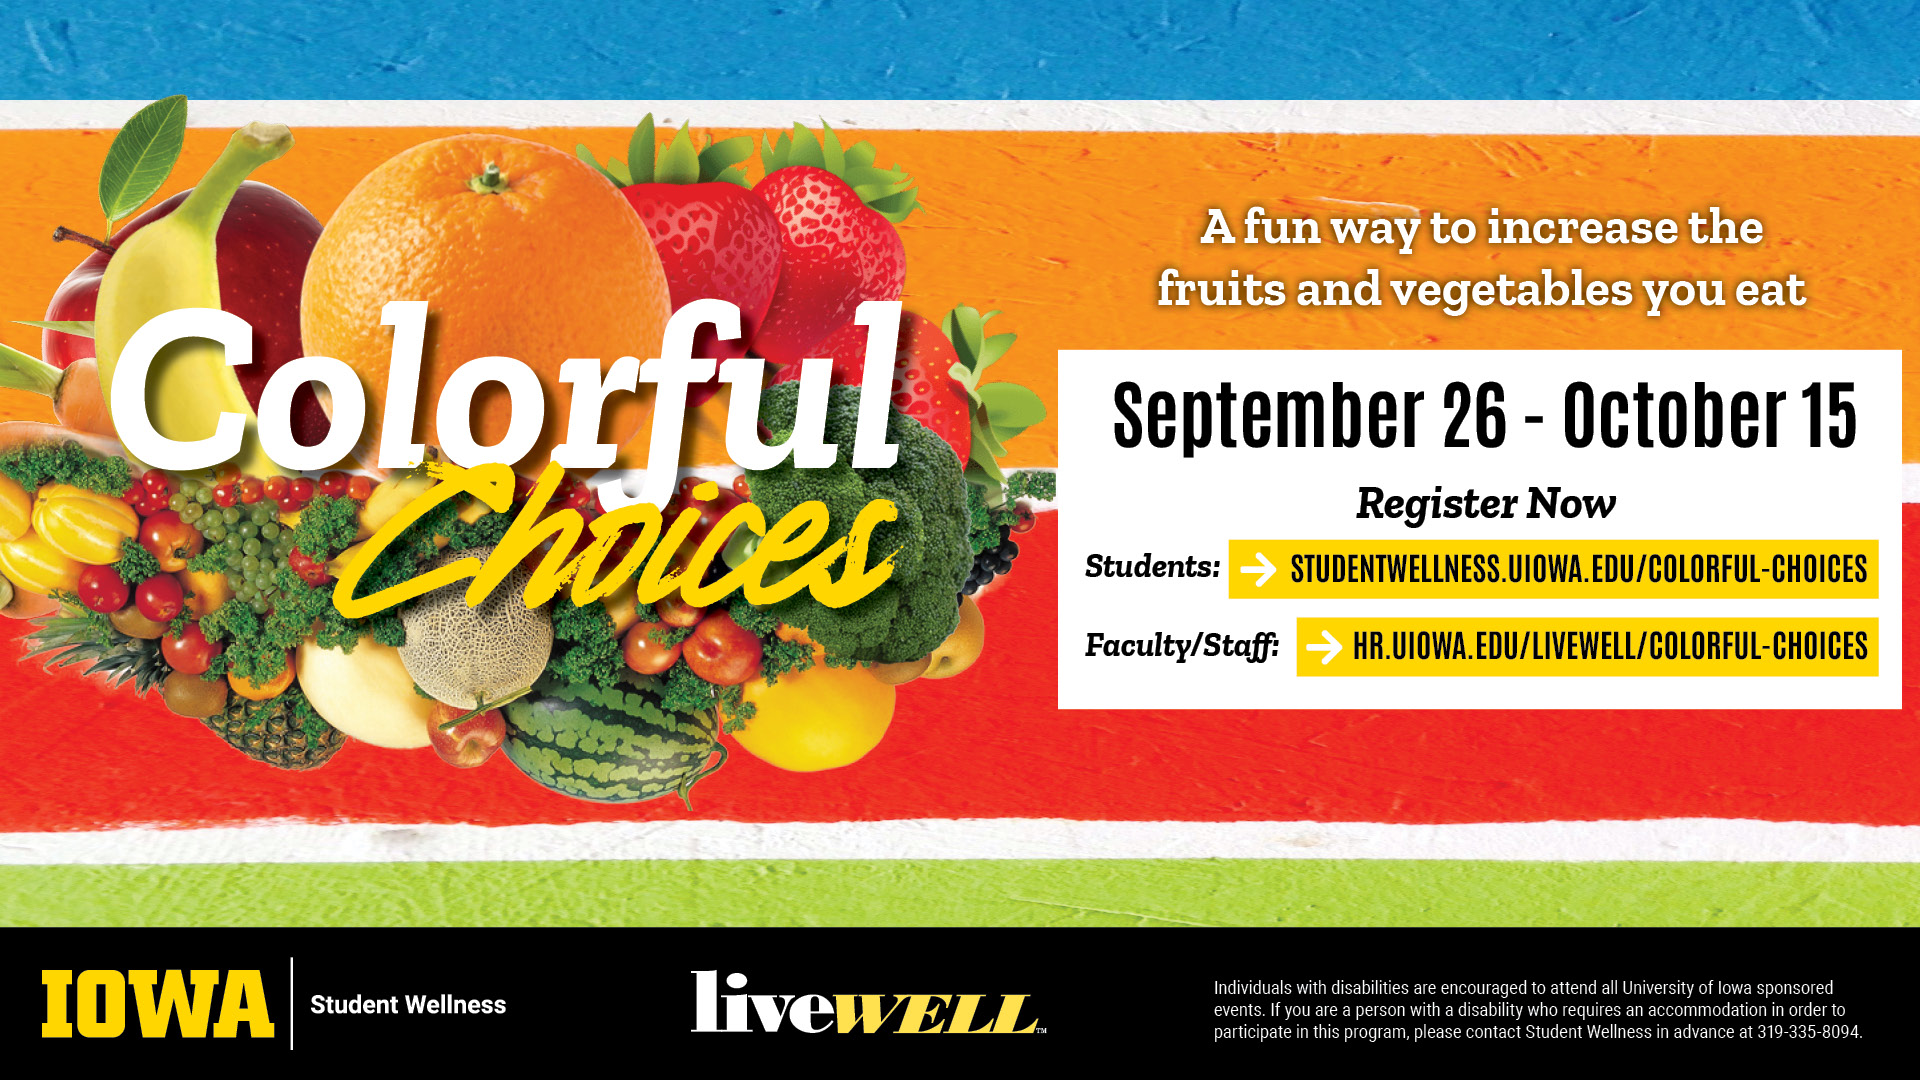 Colorful Choices! September 26 - October 15. Students and Faculty/Staff can register now